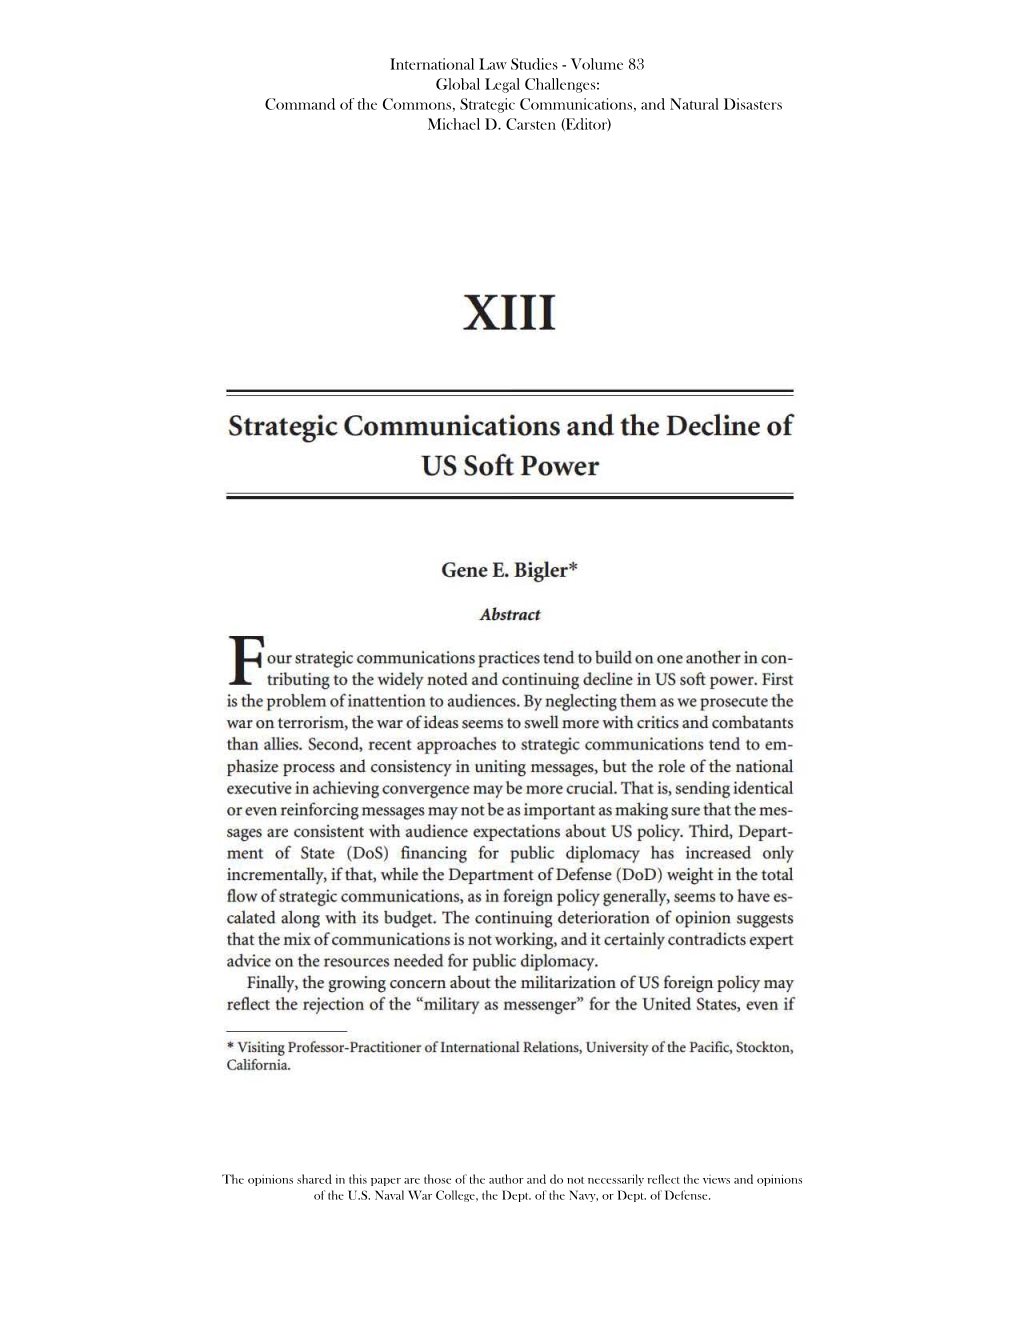 Strategic Communications and the Decline of the US Soft Power